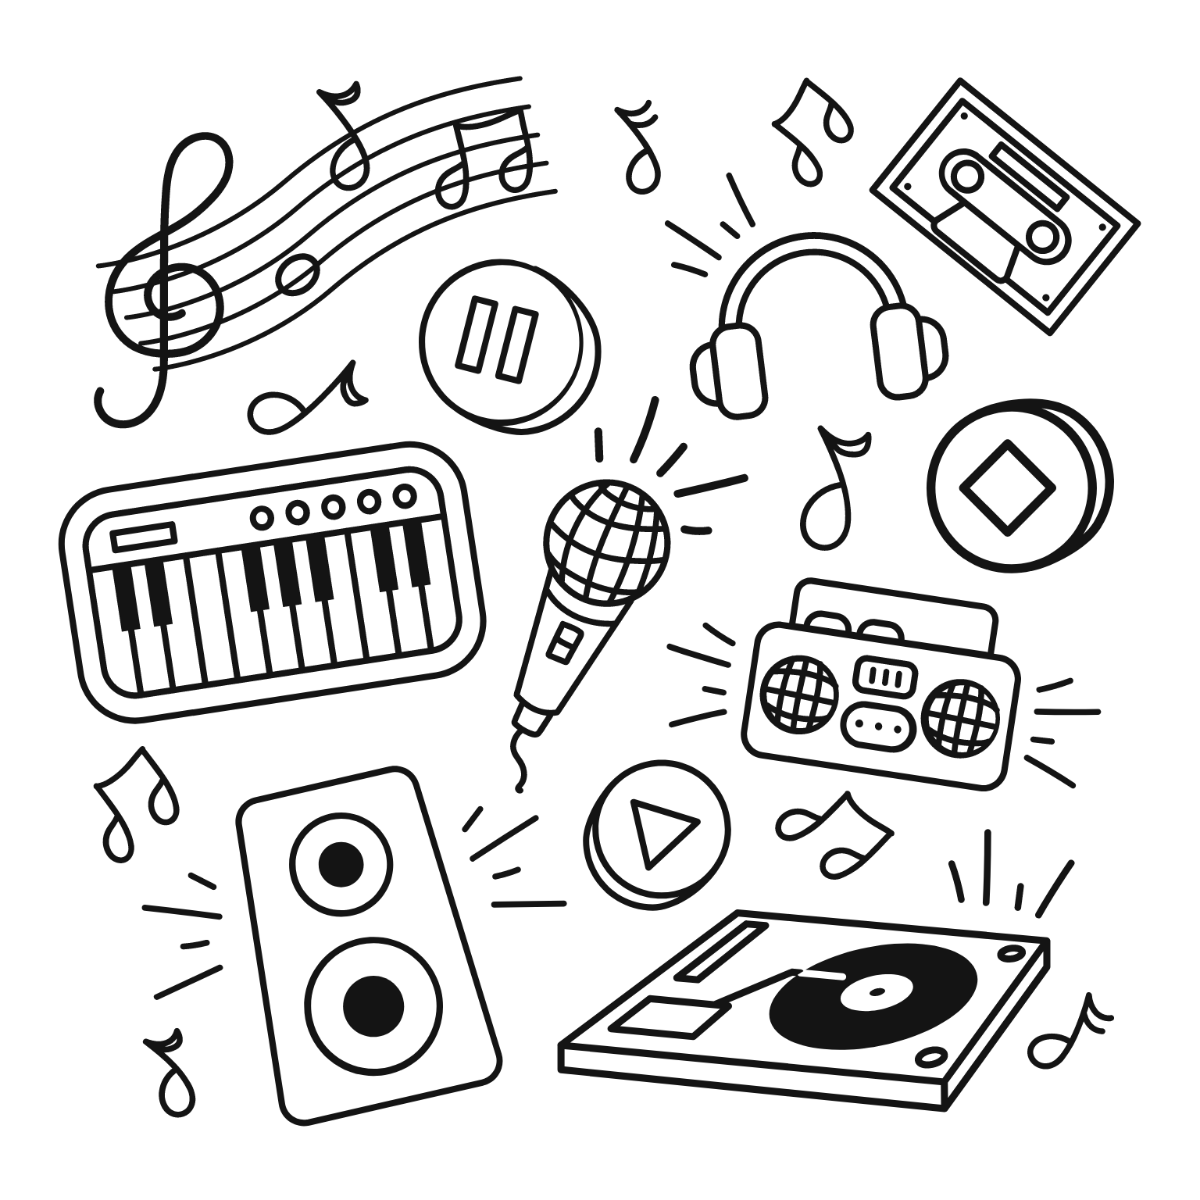 Free Music Doodle Vector